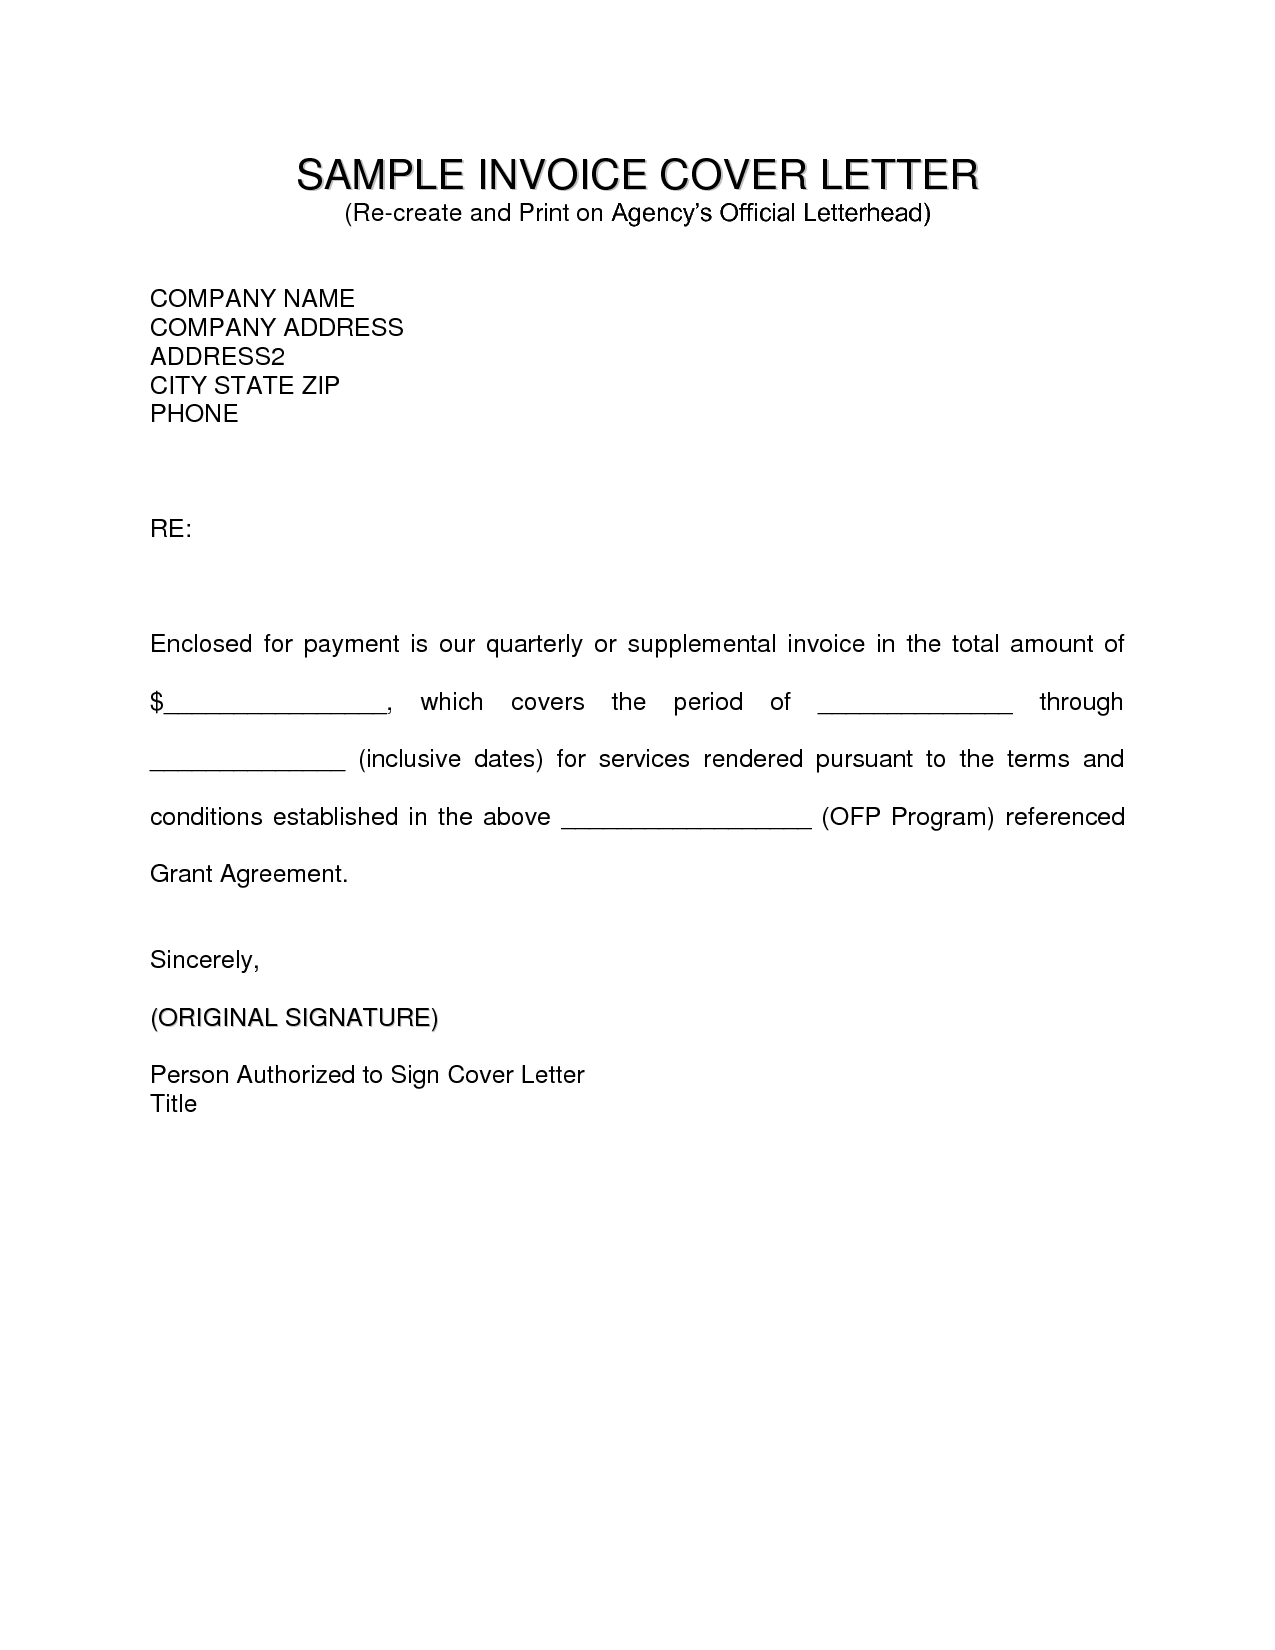 invoice cover letter gallery photos invoice cover letter sample